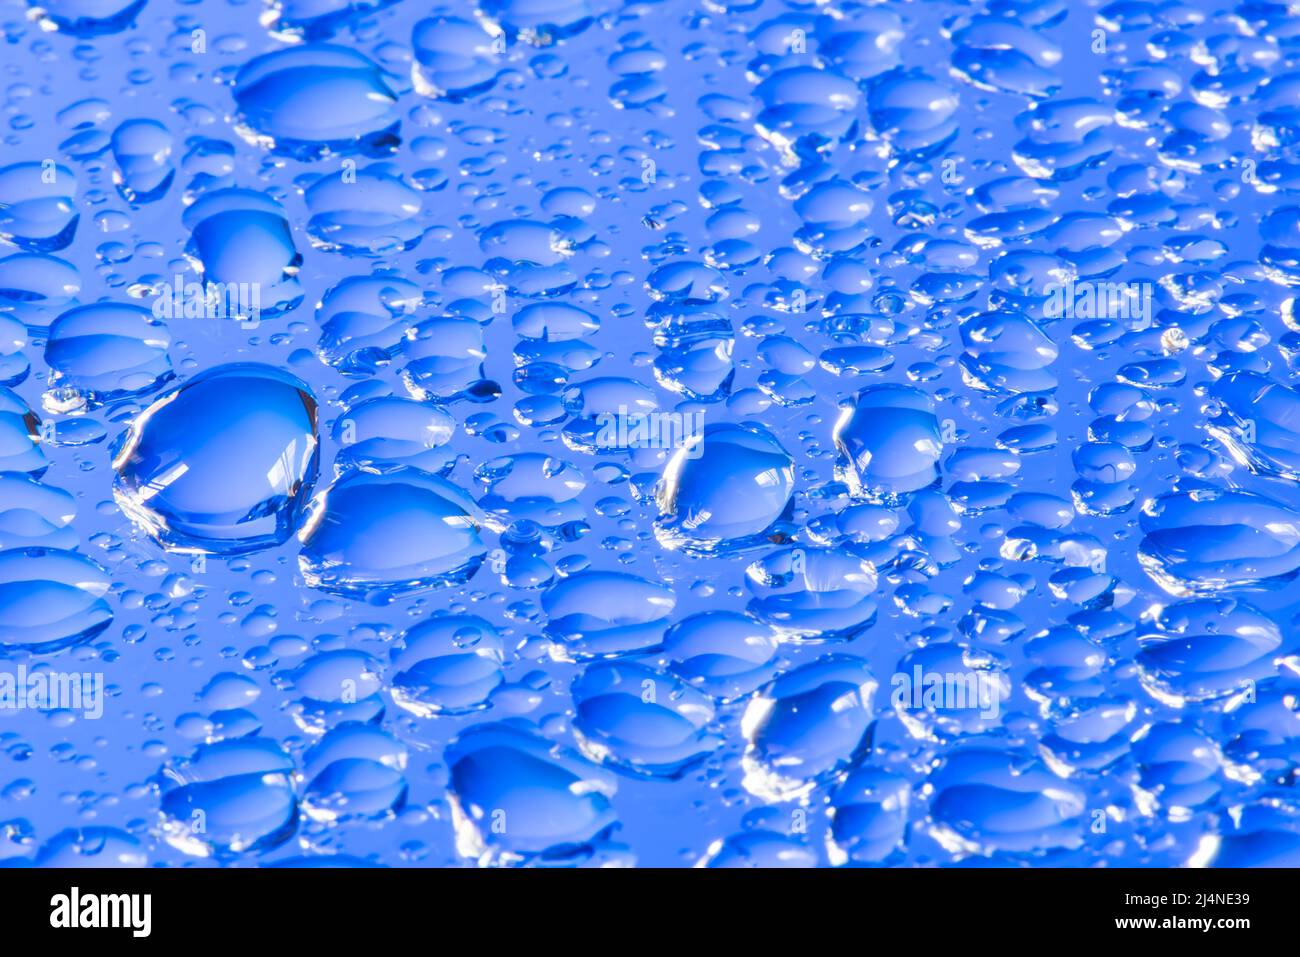 Water drops on a blue glass surface Stock Photo